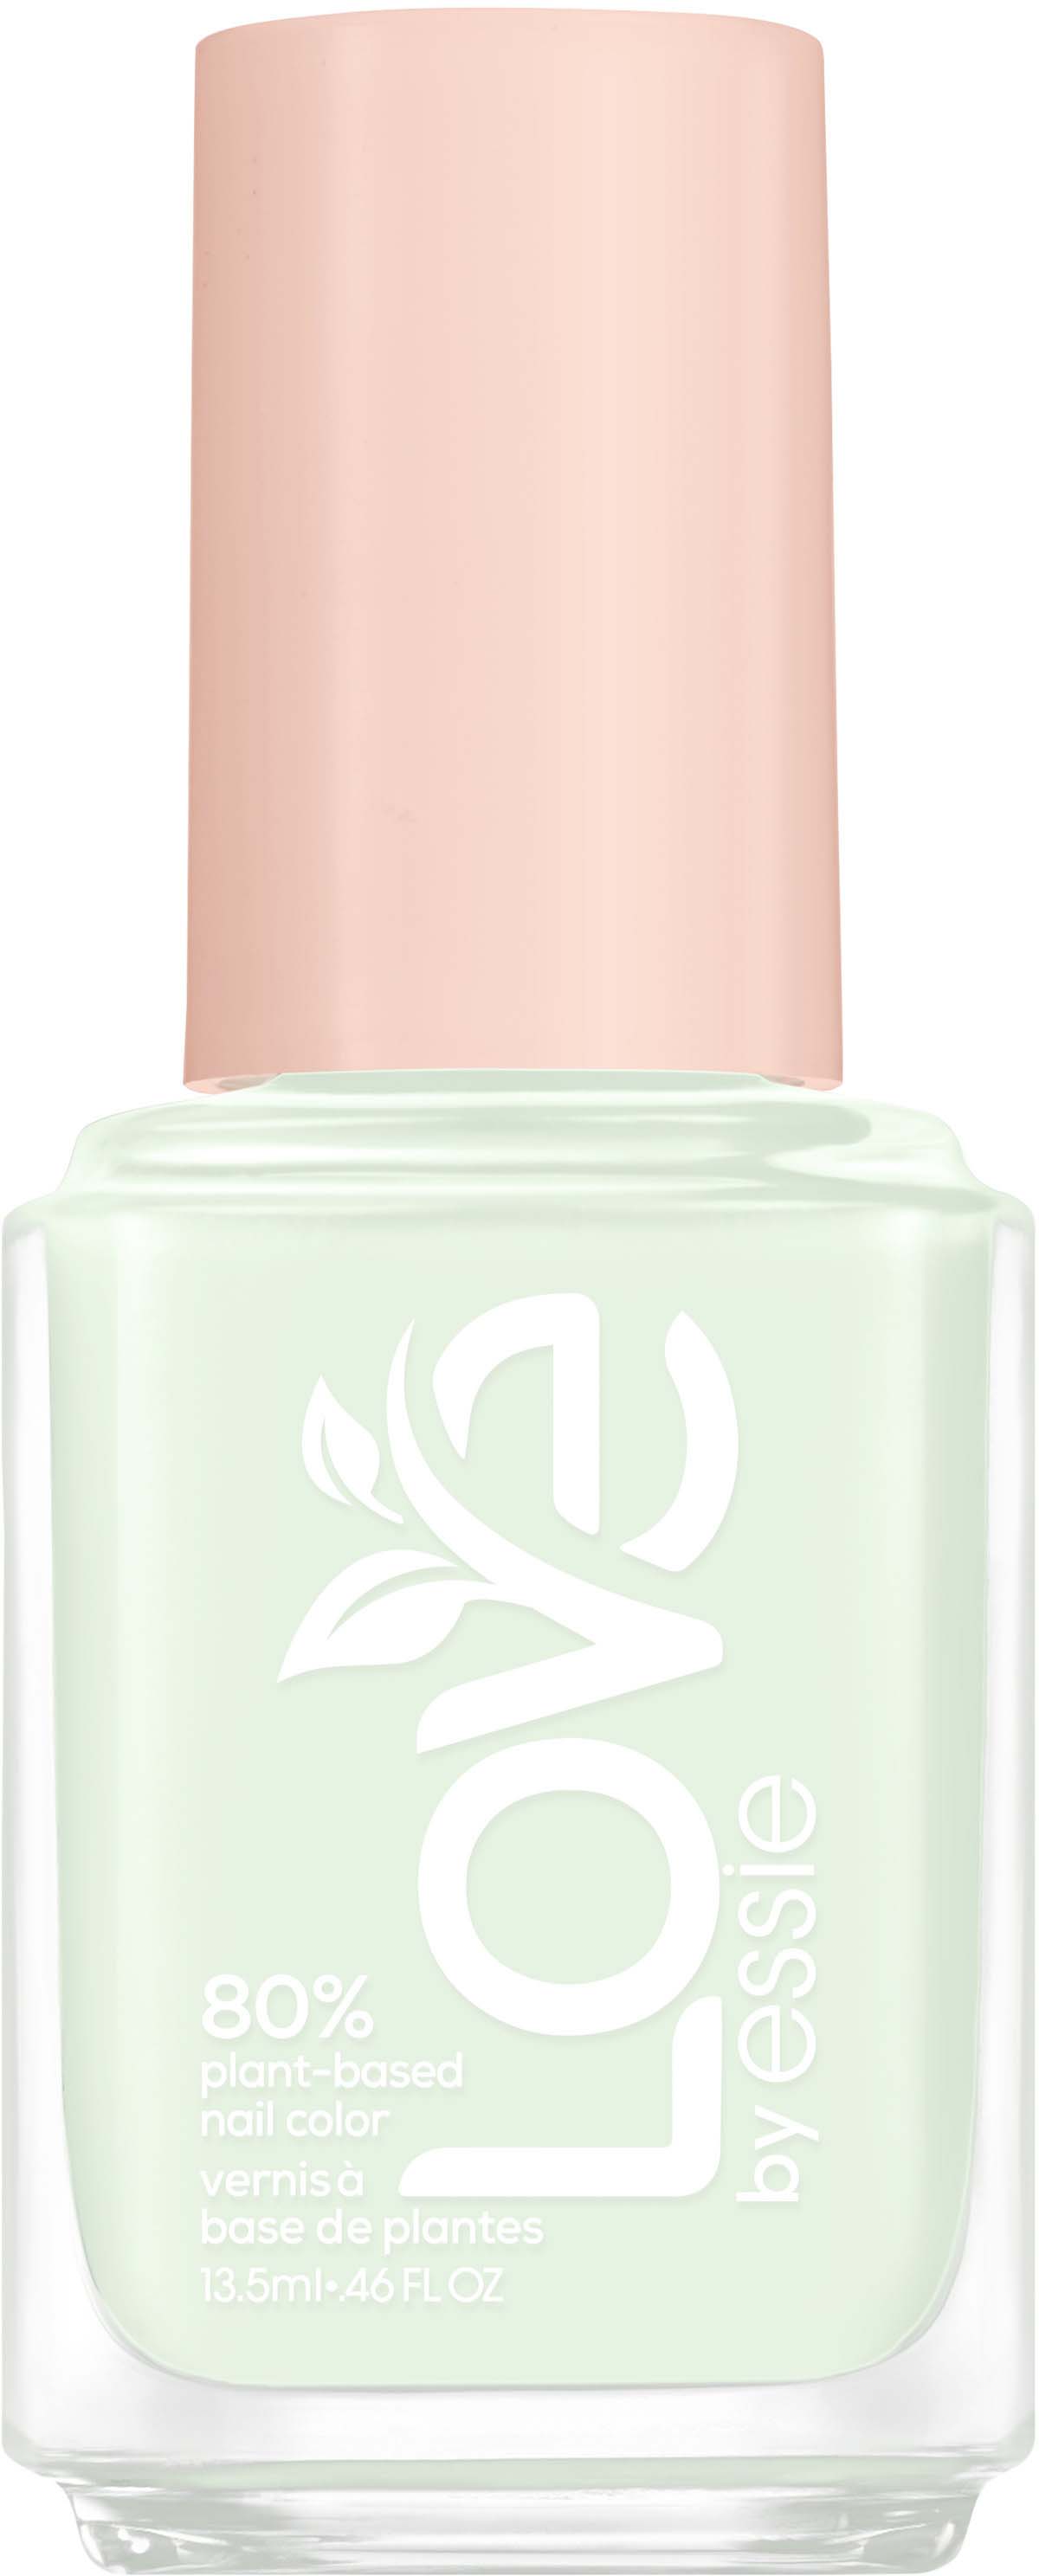 Essie LOVE by Essie 80% Thrive 220 Color Plant-based To Nail Revive